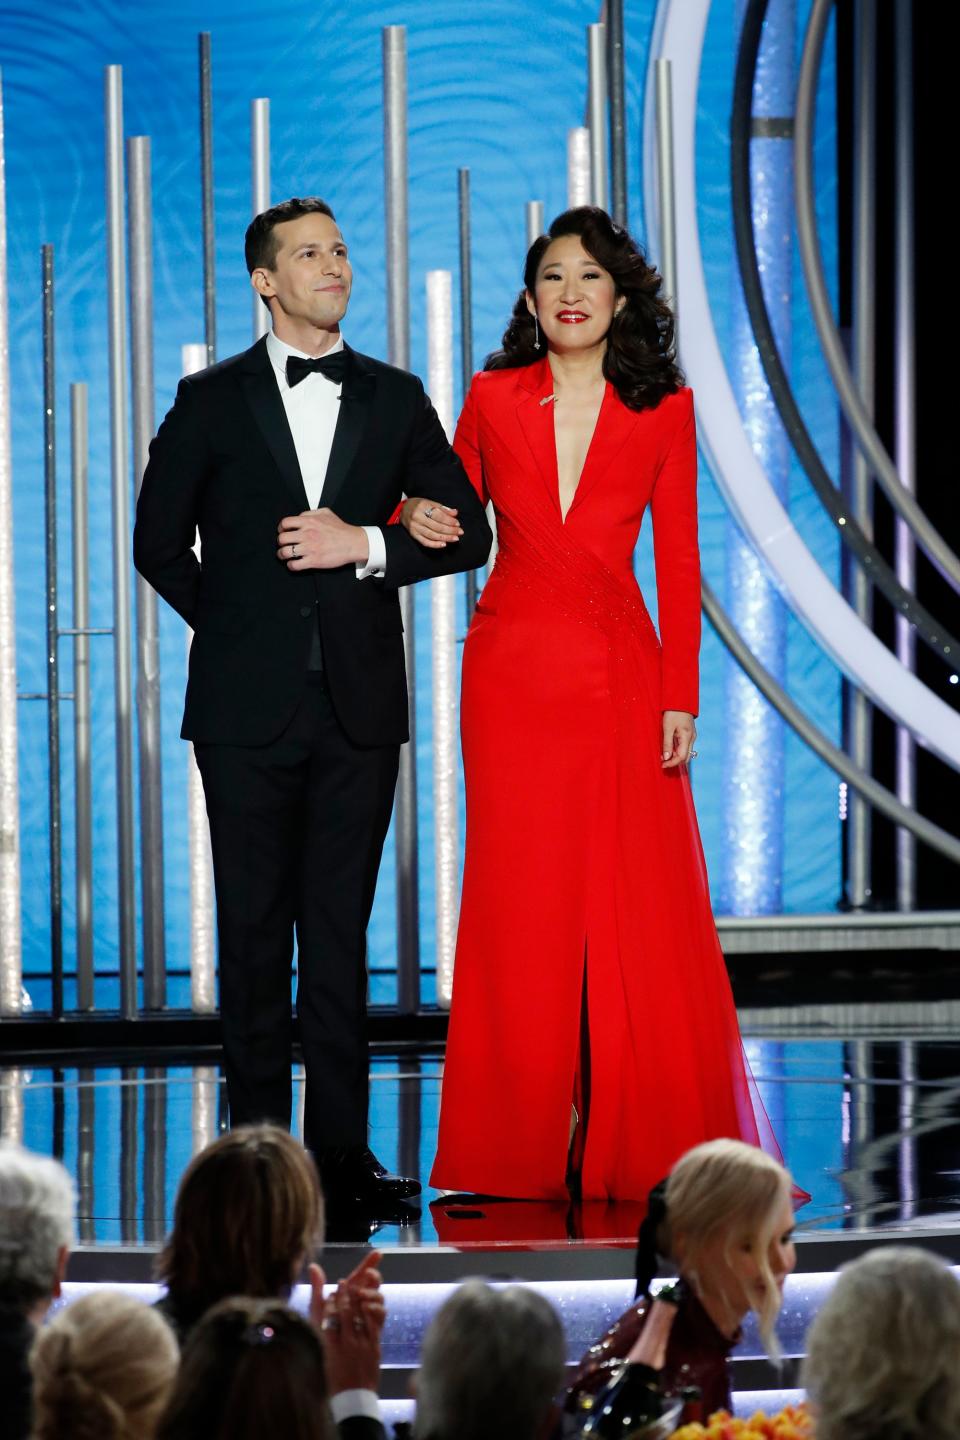 Hosts Andy Samberg and Sandra Oh  speak onstage during the 76th Annual Golden Globe Awards.